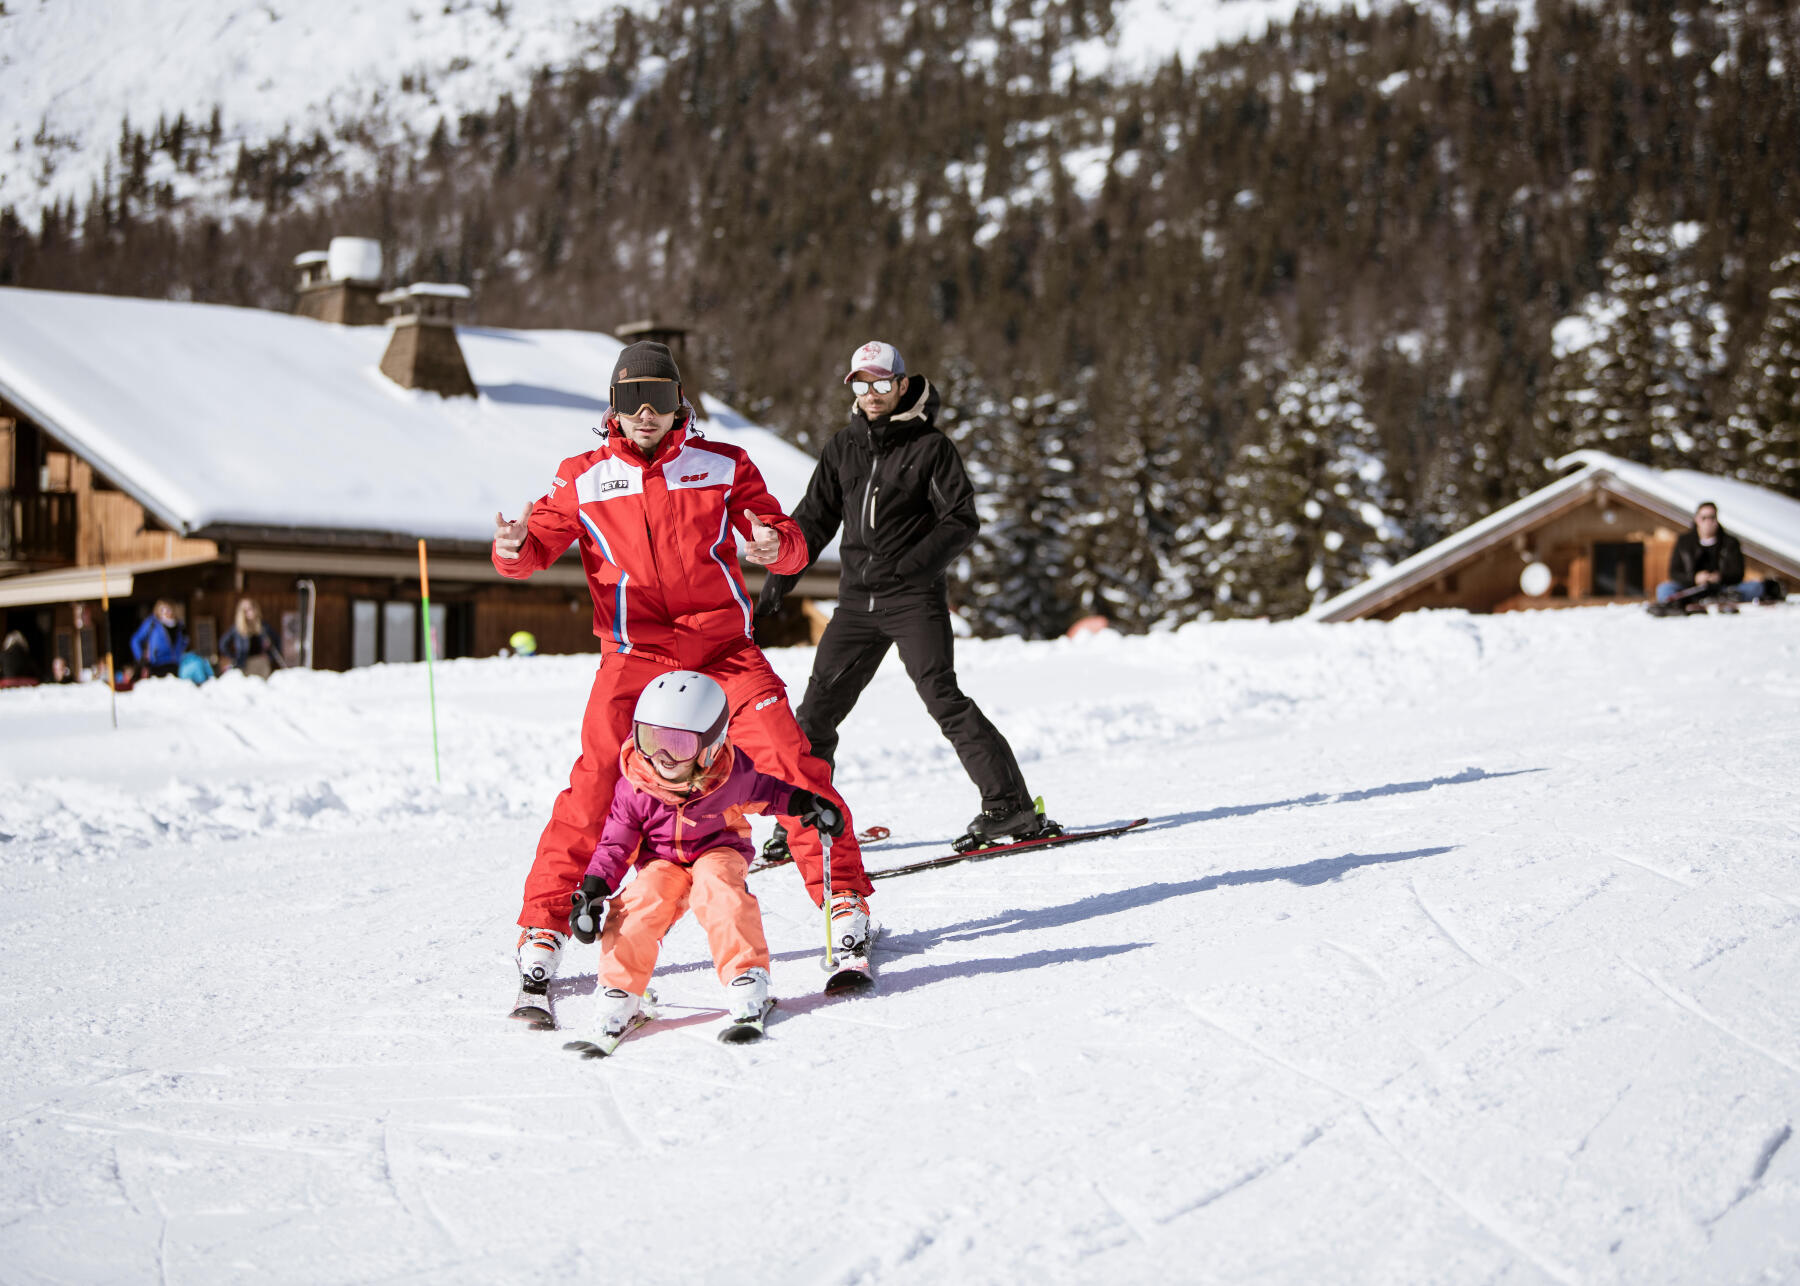 WHAT TO DO IF MY KID DOESN’T LIKE SKIING?